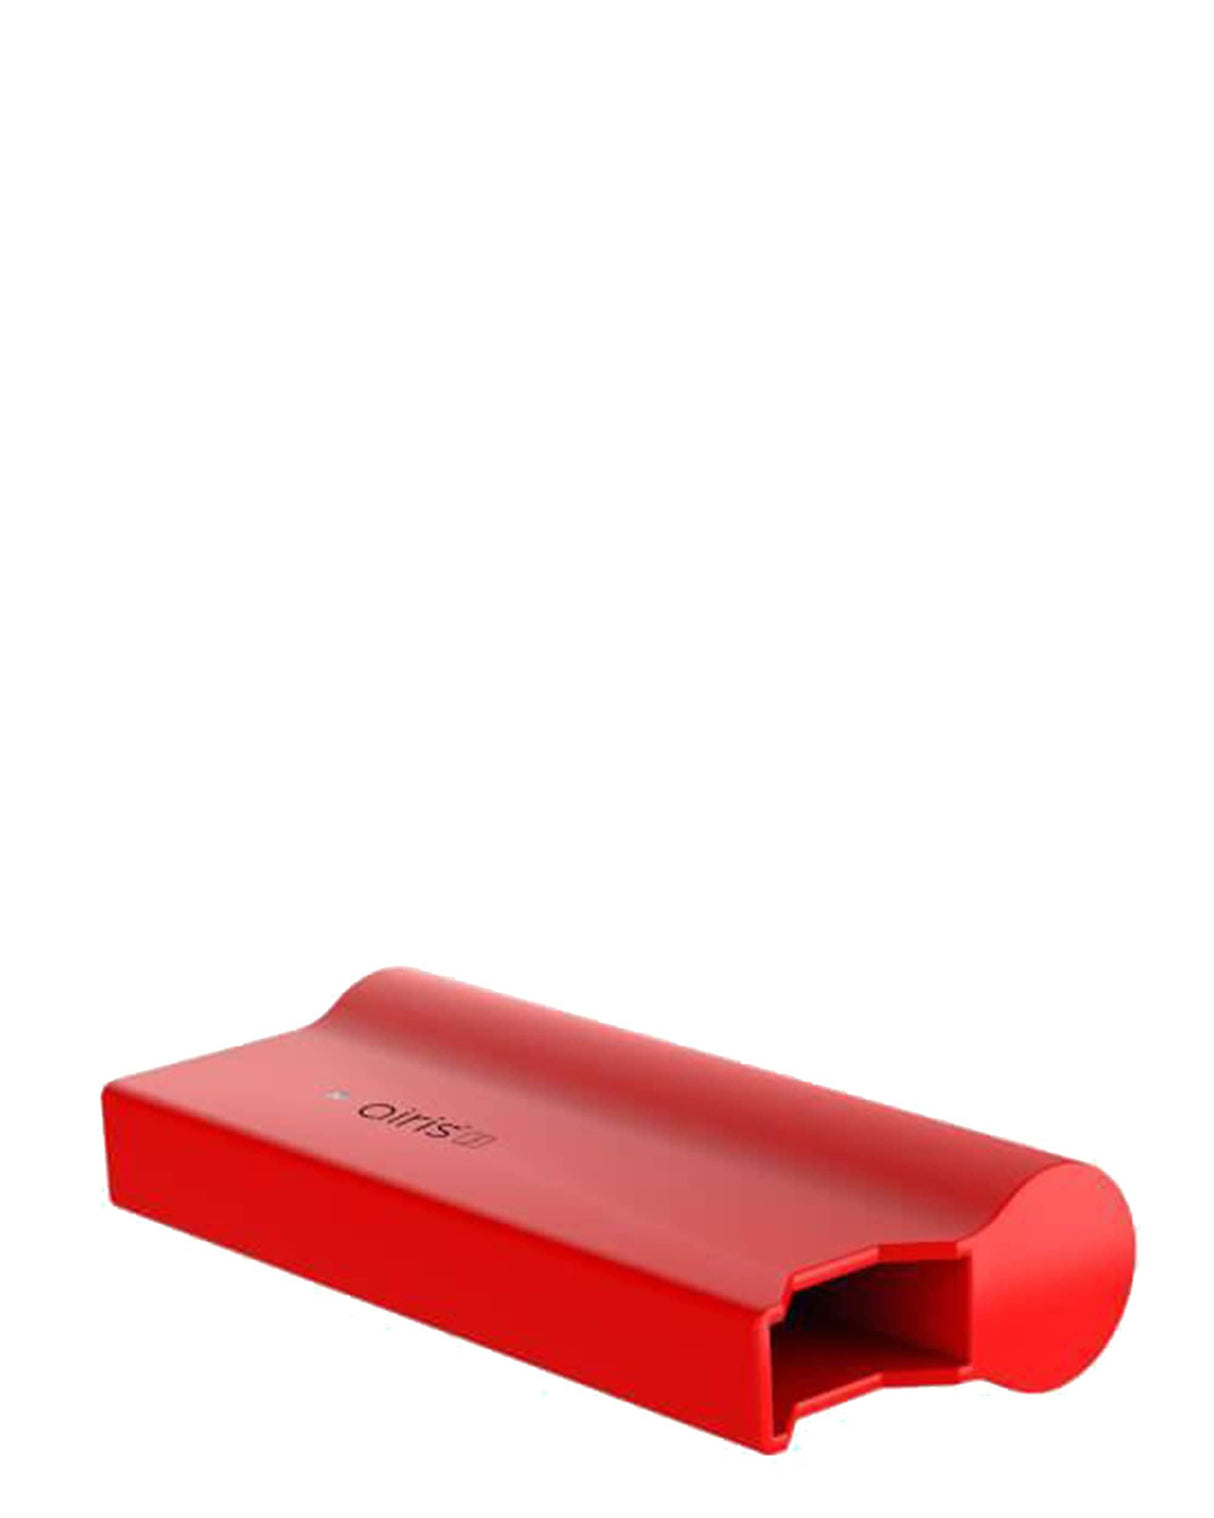 Airistech Airis J Vaporizer in Red, Portable Zinc Alloy Design, Side View on White Background